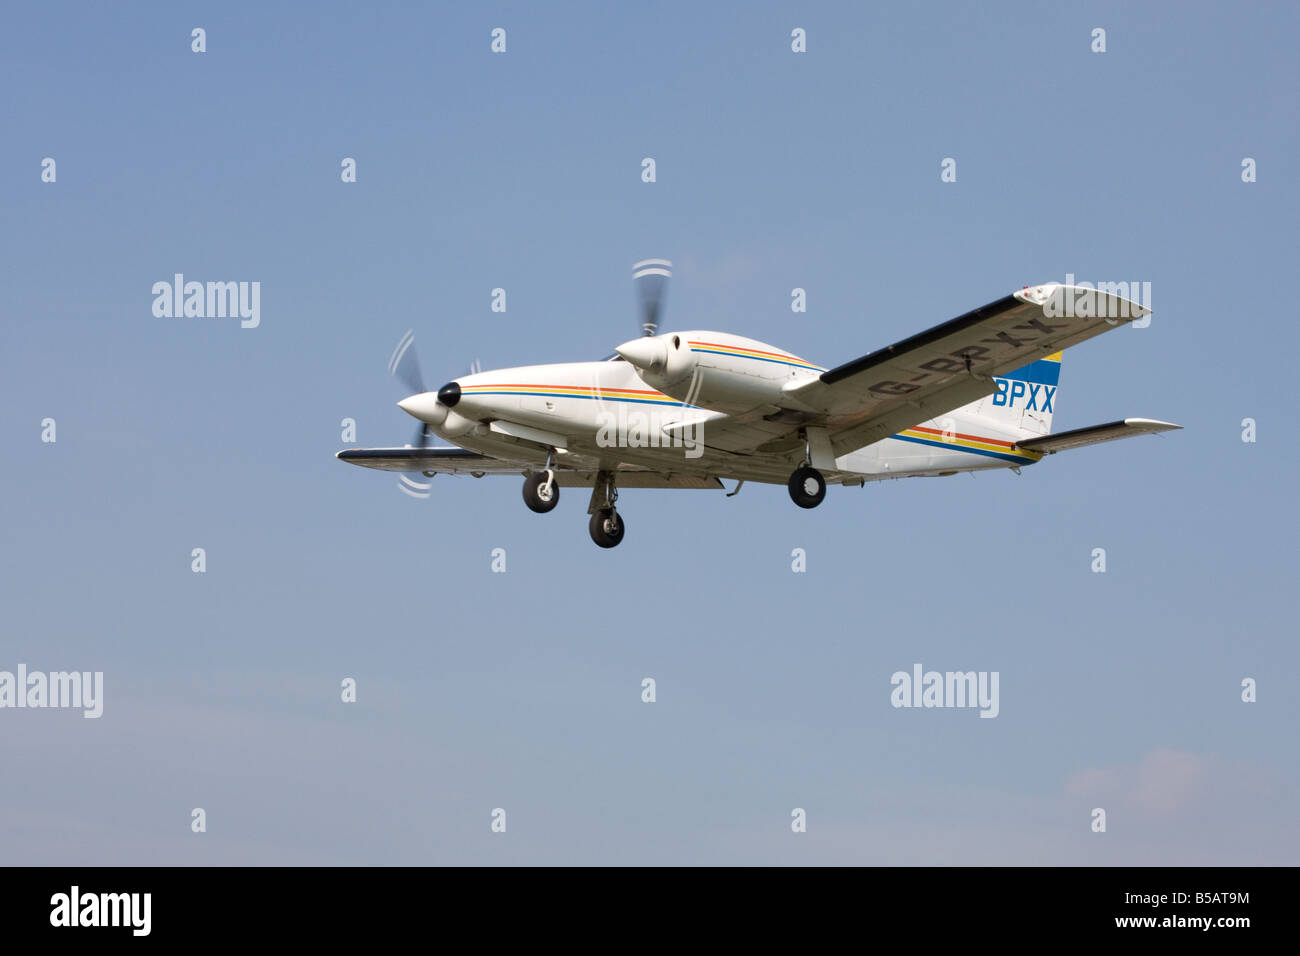 Piper pa 34 200t 11 g bpxx on hi-res stock photography and images - Alamy